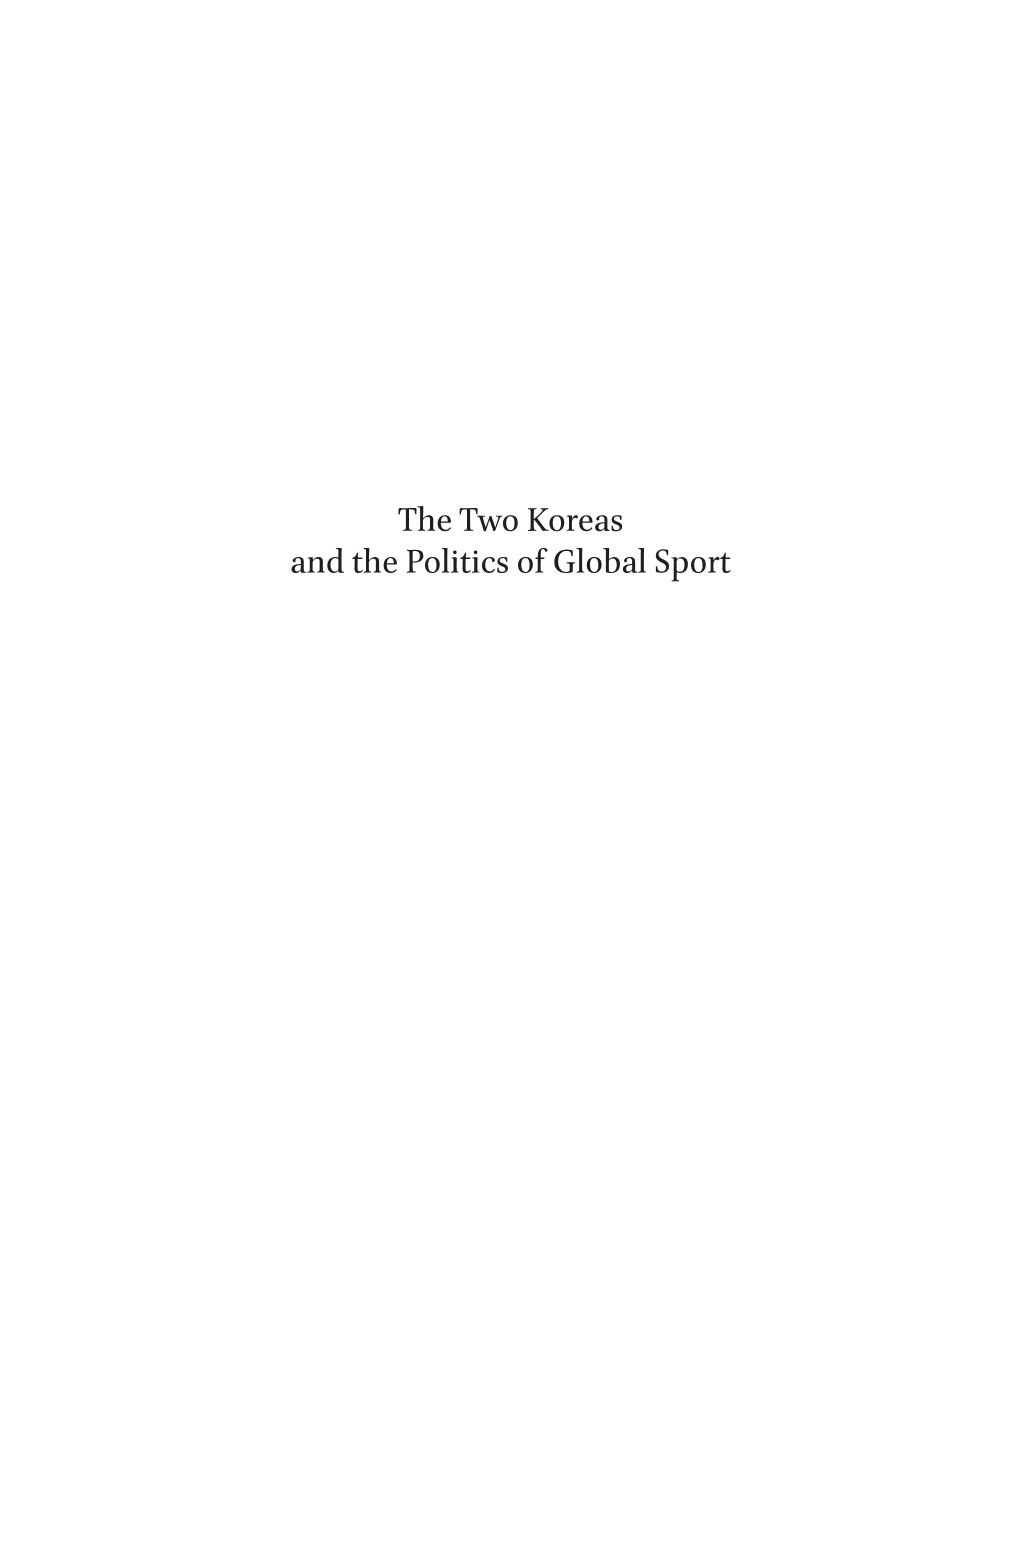 The Two Koreas and the Politics of Global Sport